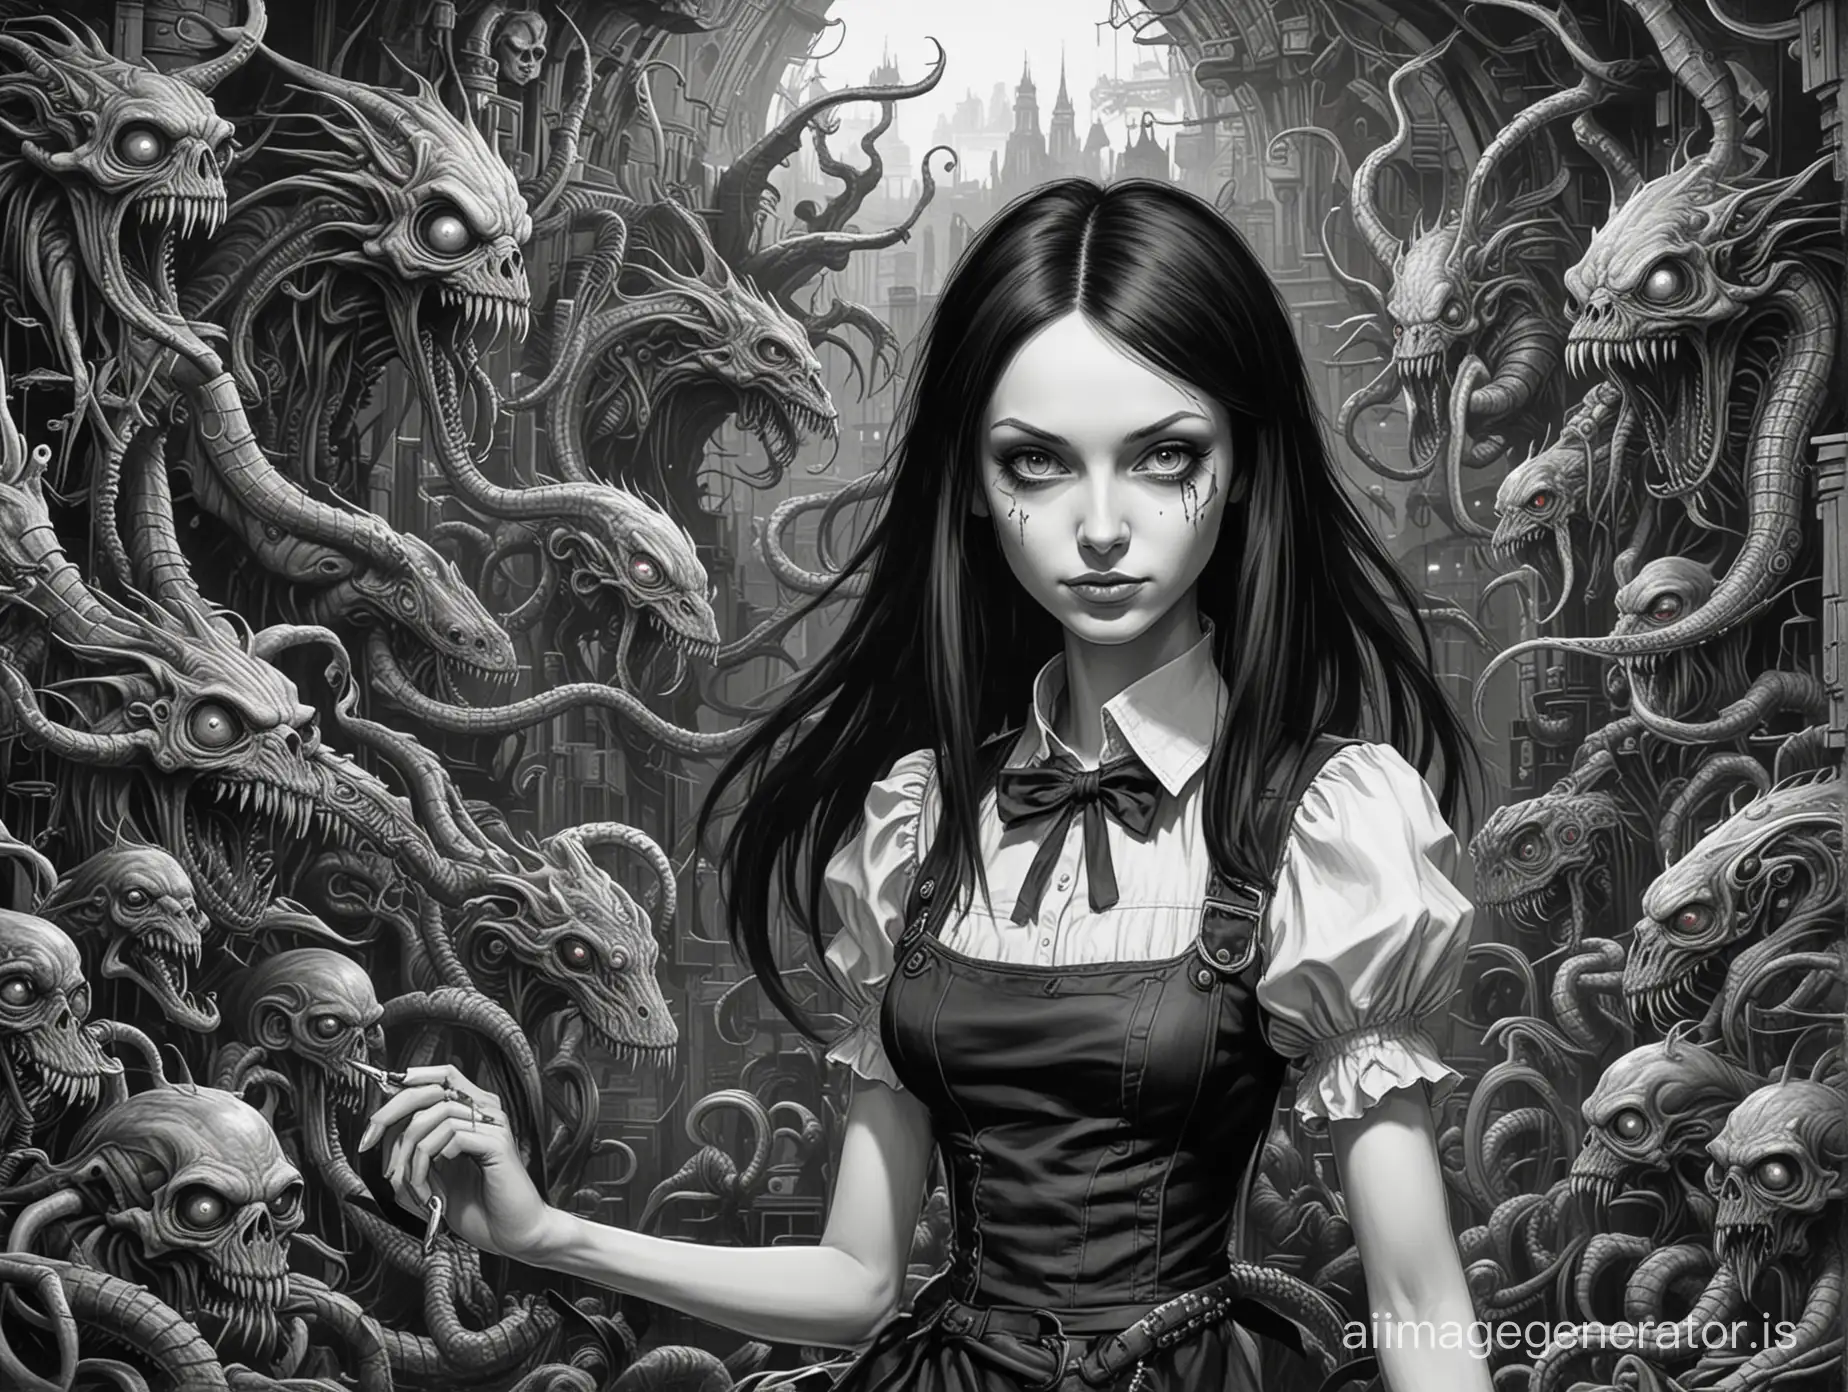 draw american mcgee's alice in a cyberpunk setting, adding more lovecraftian horror in the background, in the style of Banksy, if he drew pastels like Mane, in black and white with increased contrast, leaving red for outlines and contours